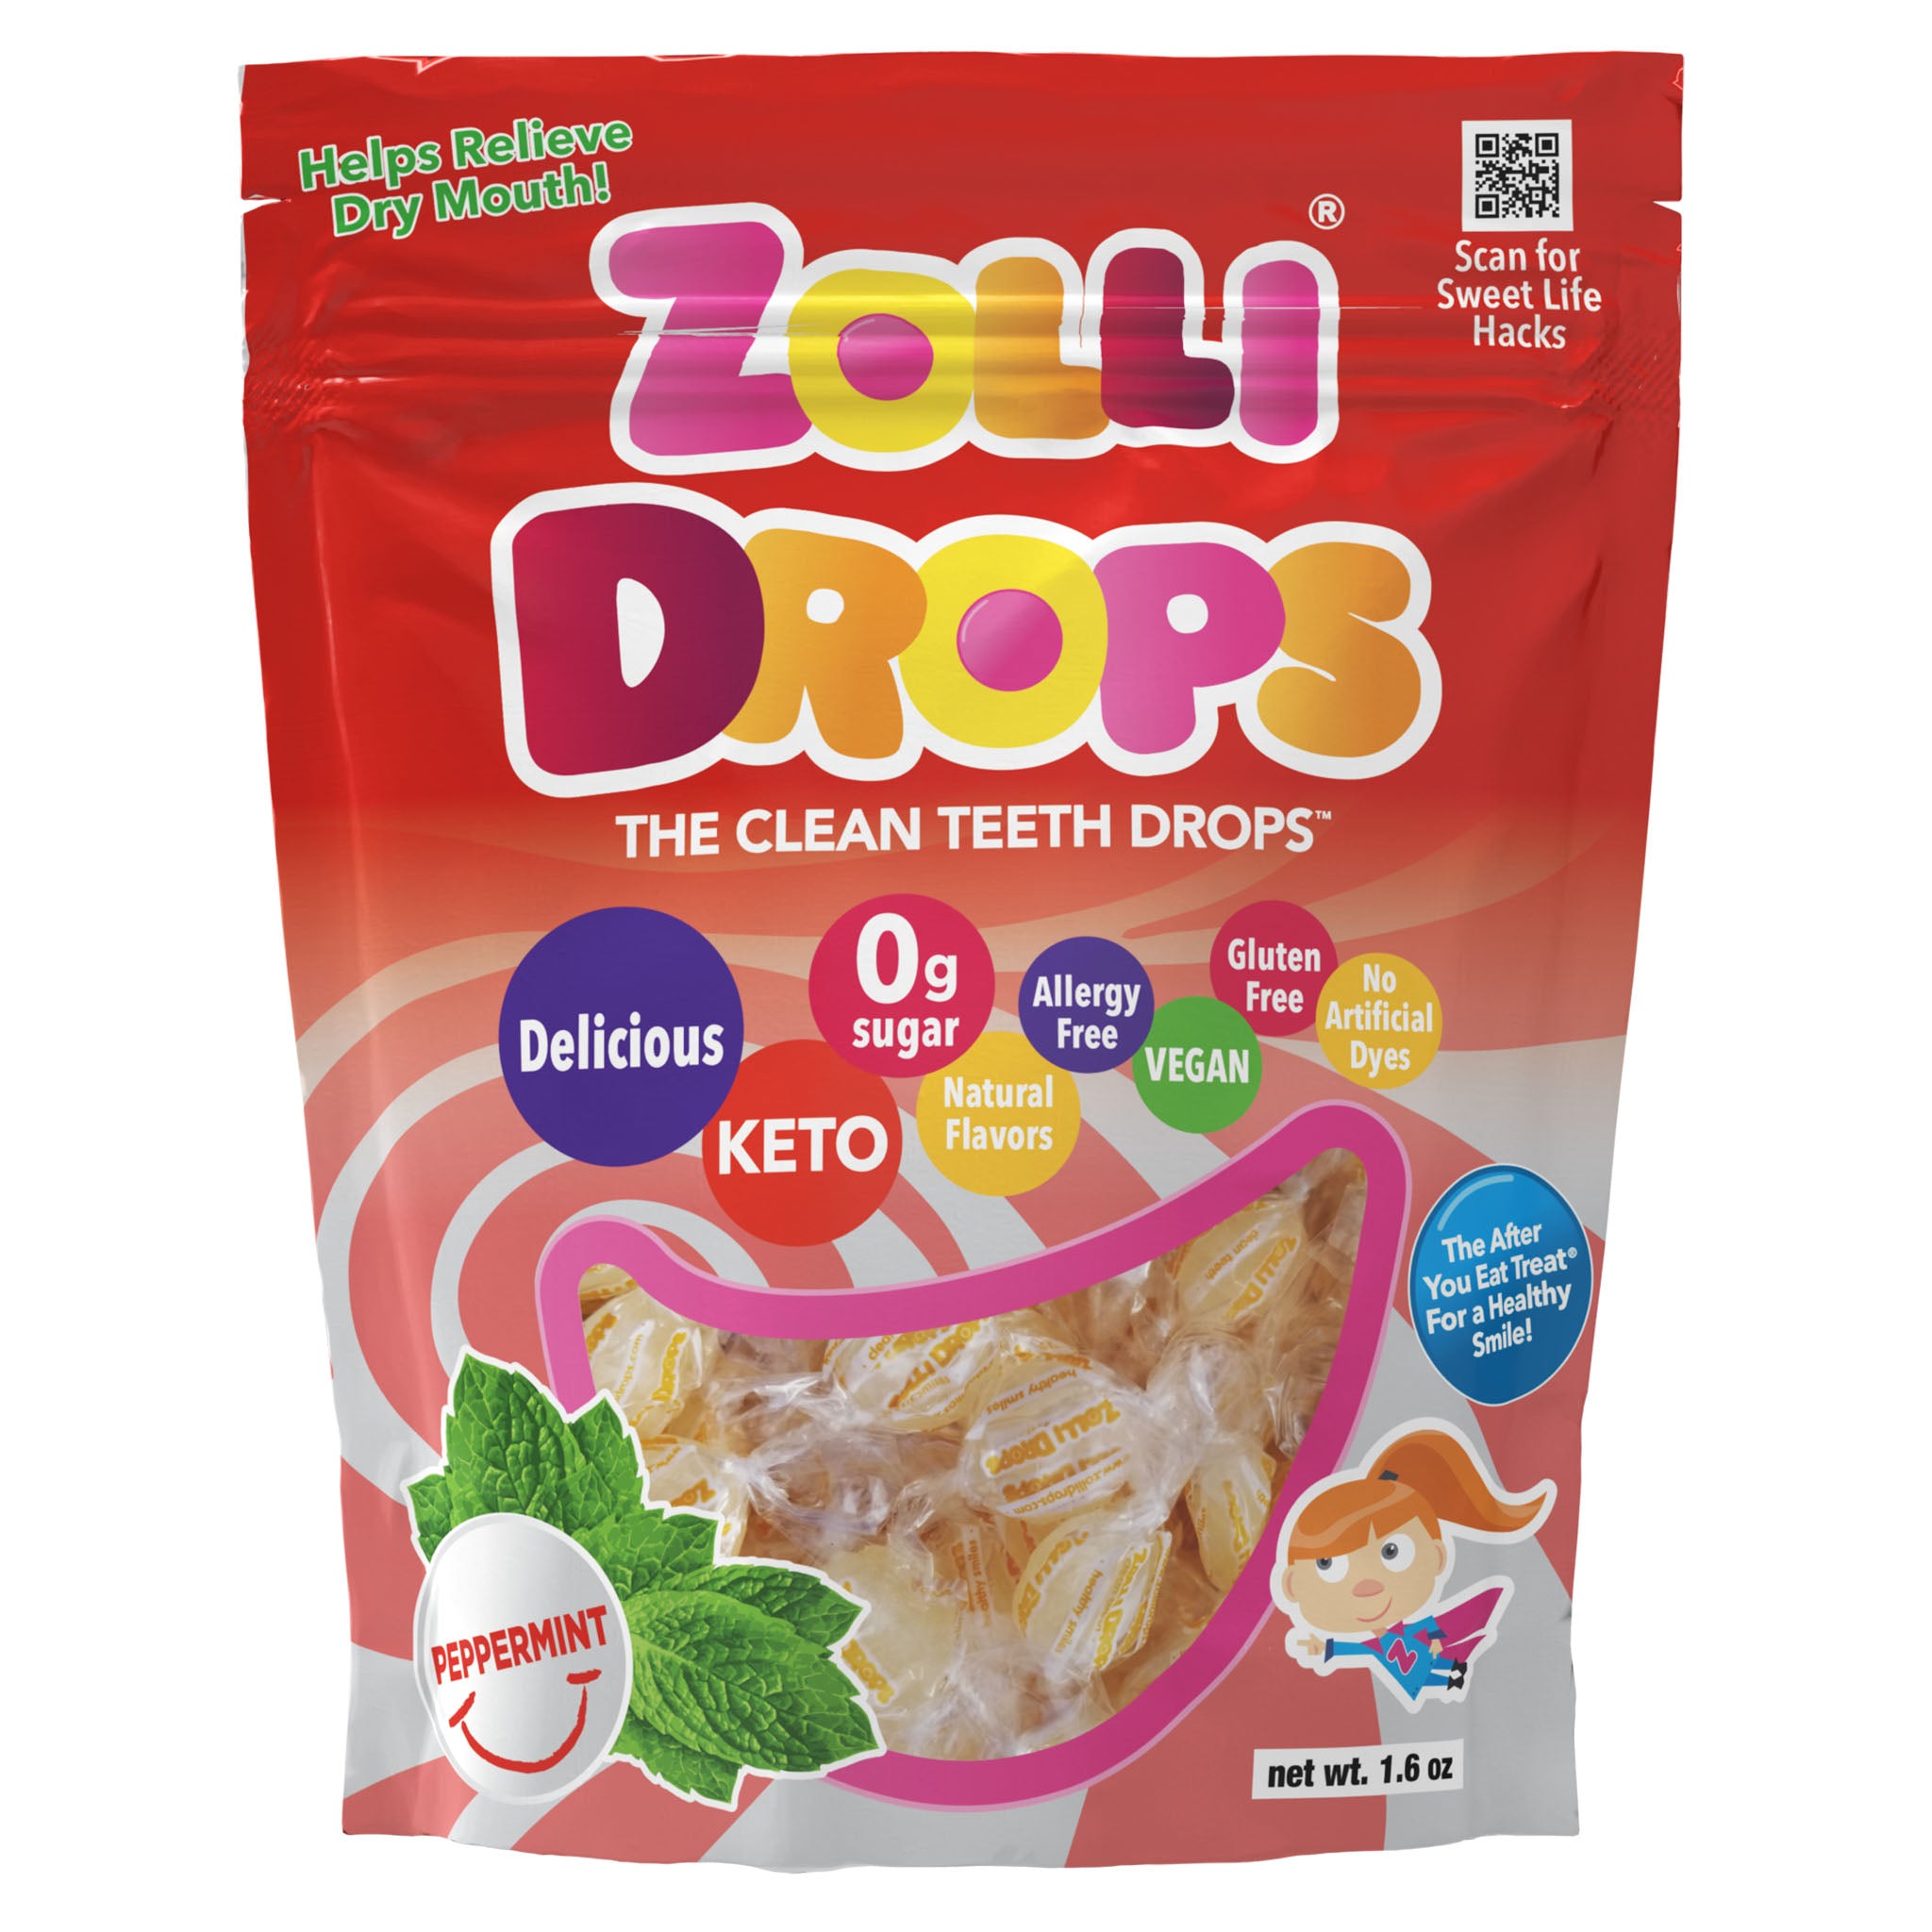 Zolli Drops Peppermint Flavored Clean Teeth Hard Candy